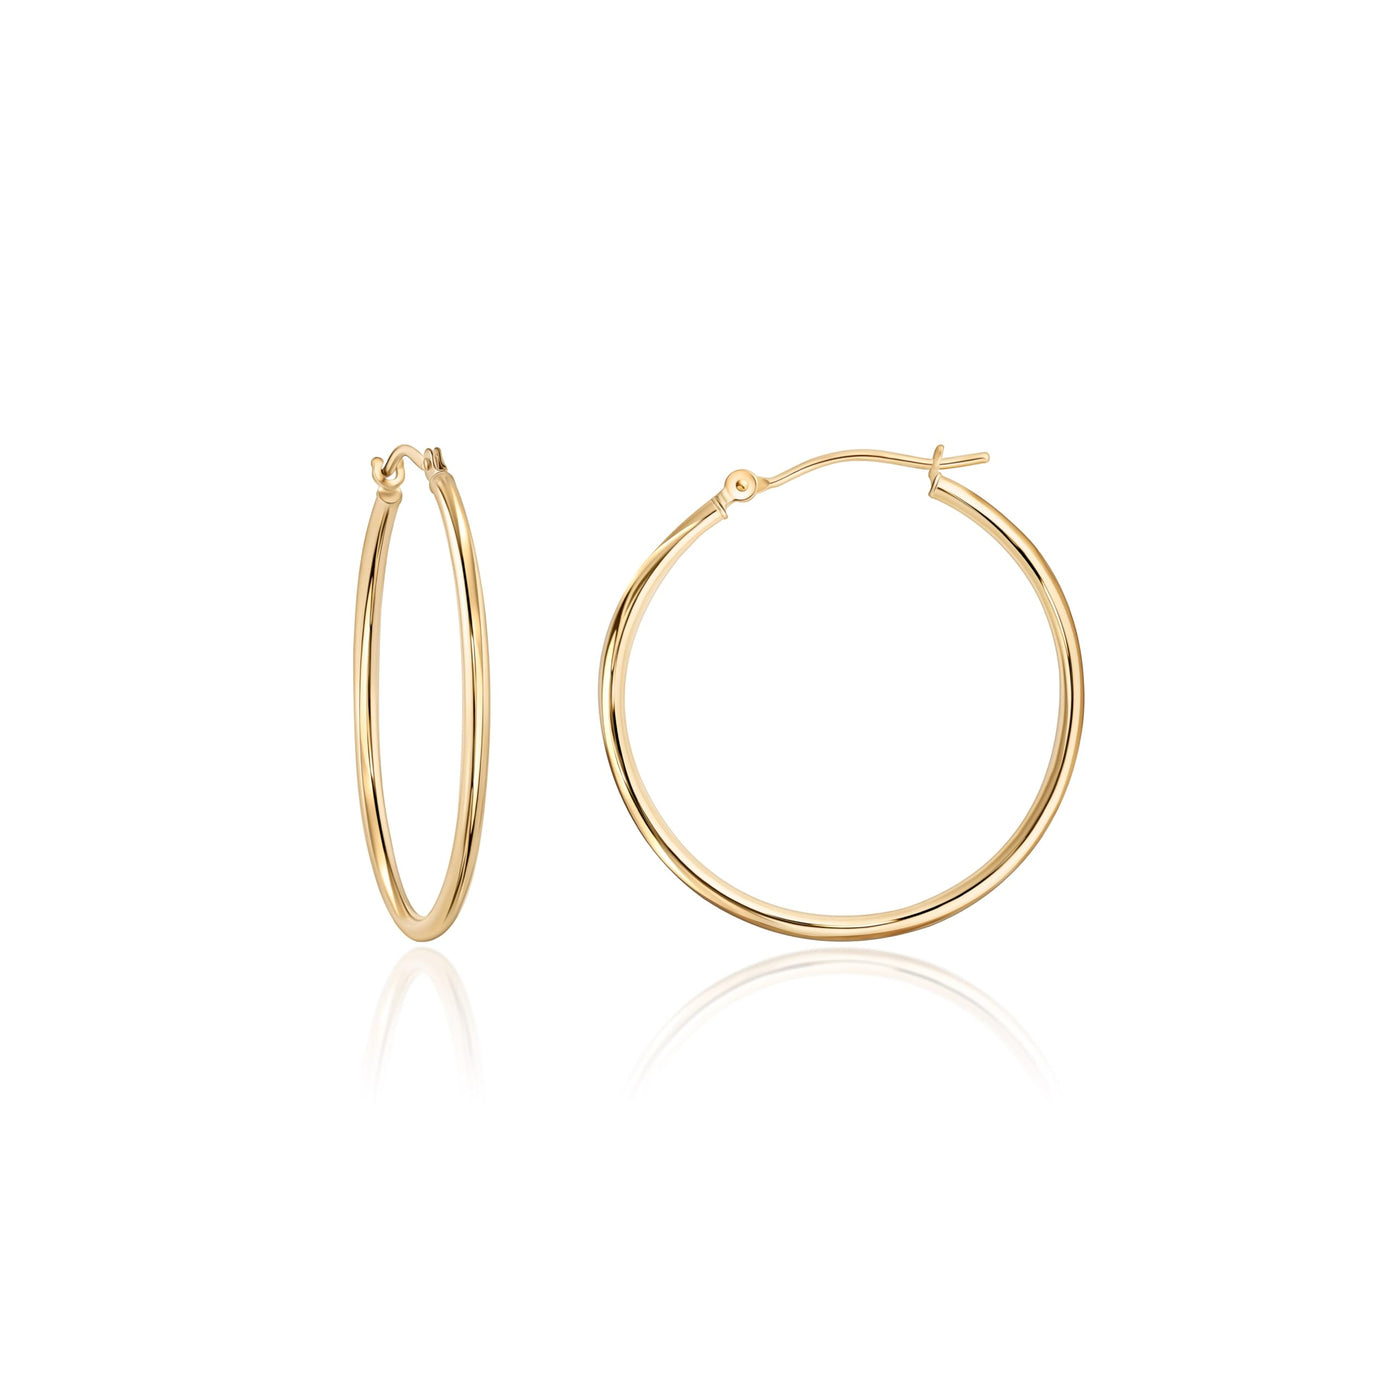 14K Yellow Gold Classic Shiny Polished Round Hoop Earrings - 1.5mm tube